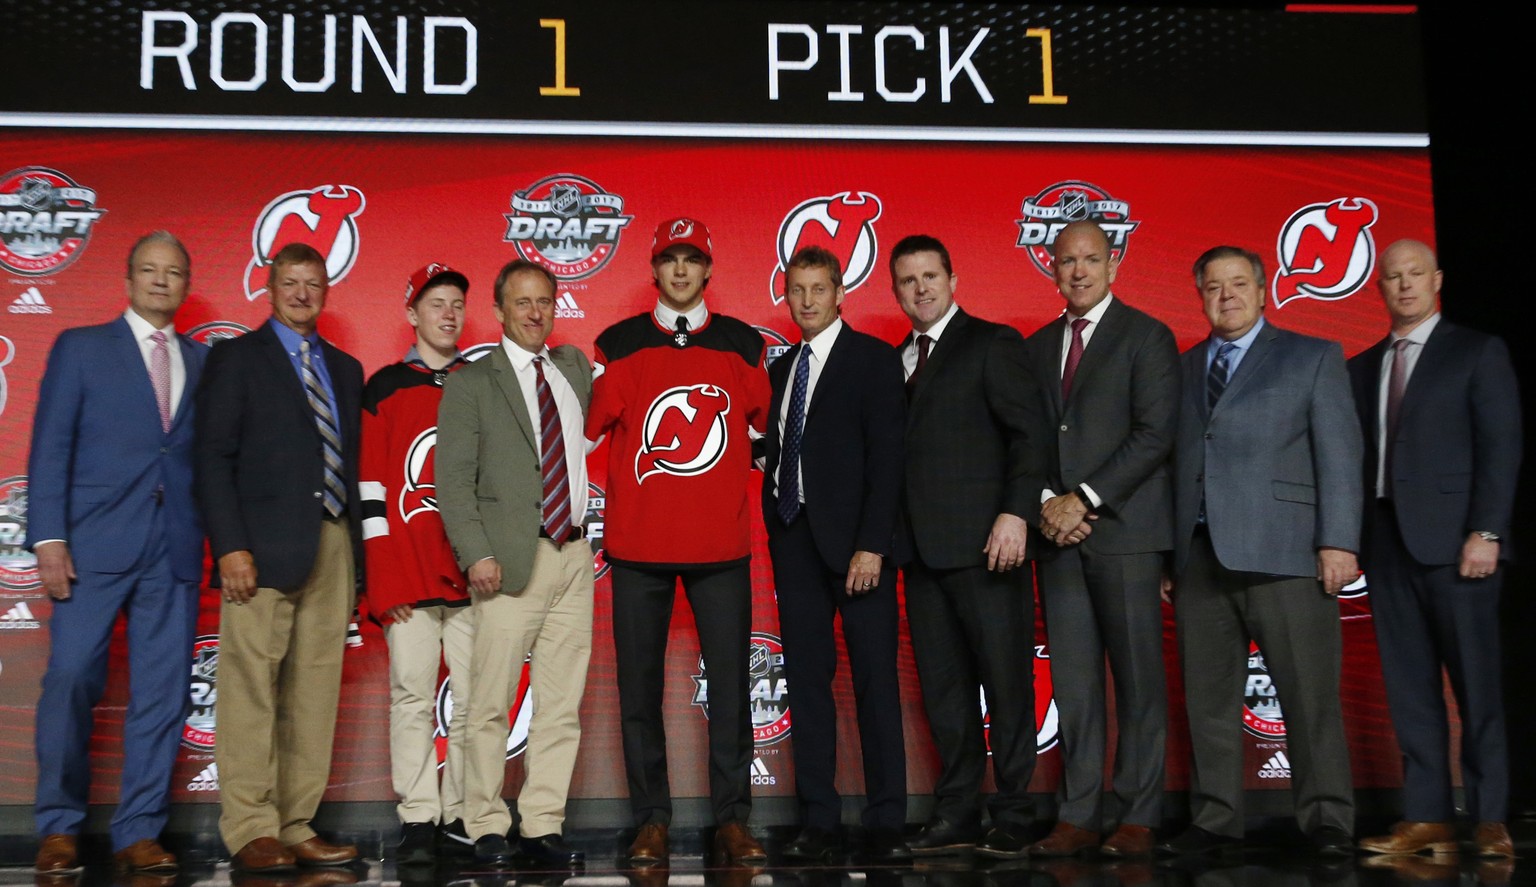 Center Nico Hischier holds a New Jersey Devils jersey after being selected by the team in the first round of the NHL hockey draft, Friday, June 23, 2017, in Chicago. (AP Photo/Nam Y. Huh)